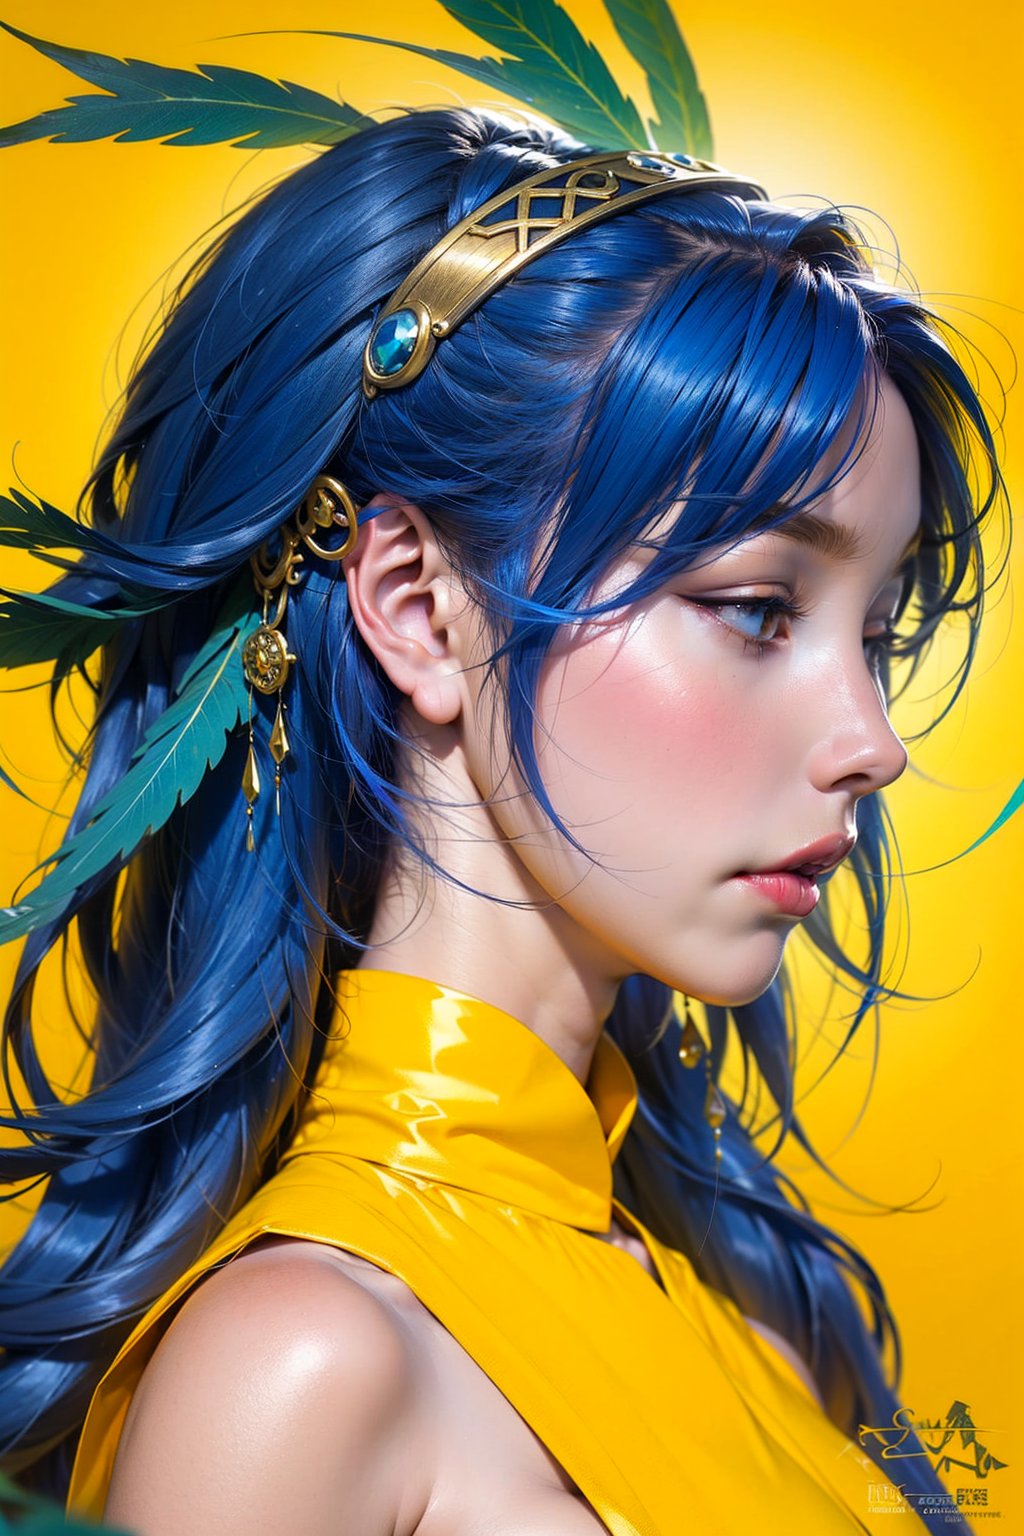 1 girl, solo, headdress, long hair, feathers, jewelry, blue hair, gemstones, yellow background, lips, hair decoration, profile, braids, portrait, watermark, viewed from the side, looking away, feather hair decoration